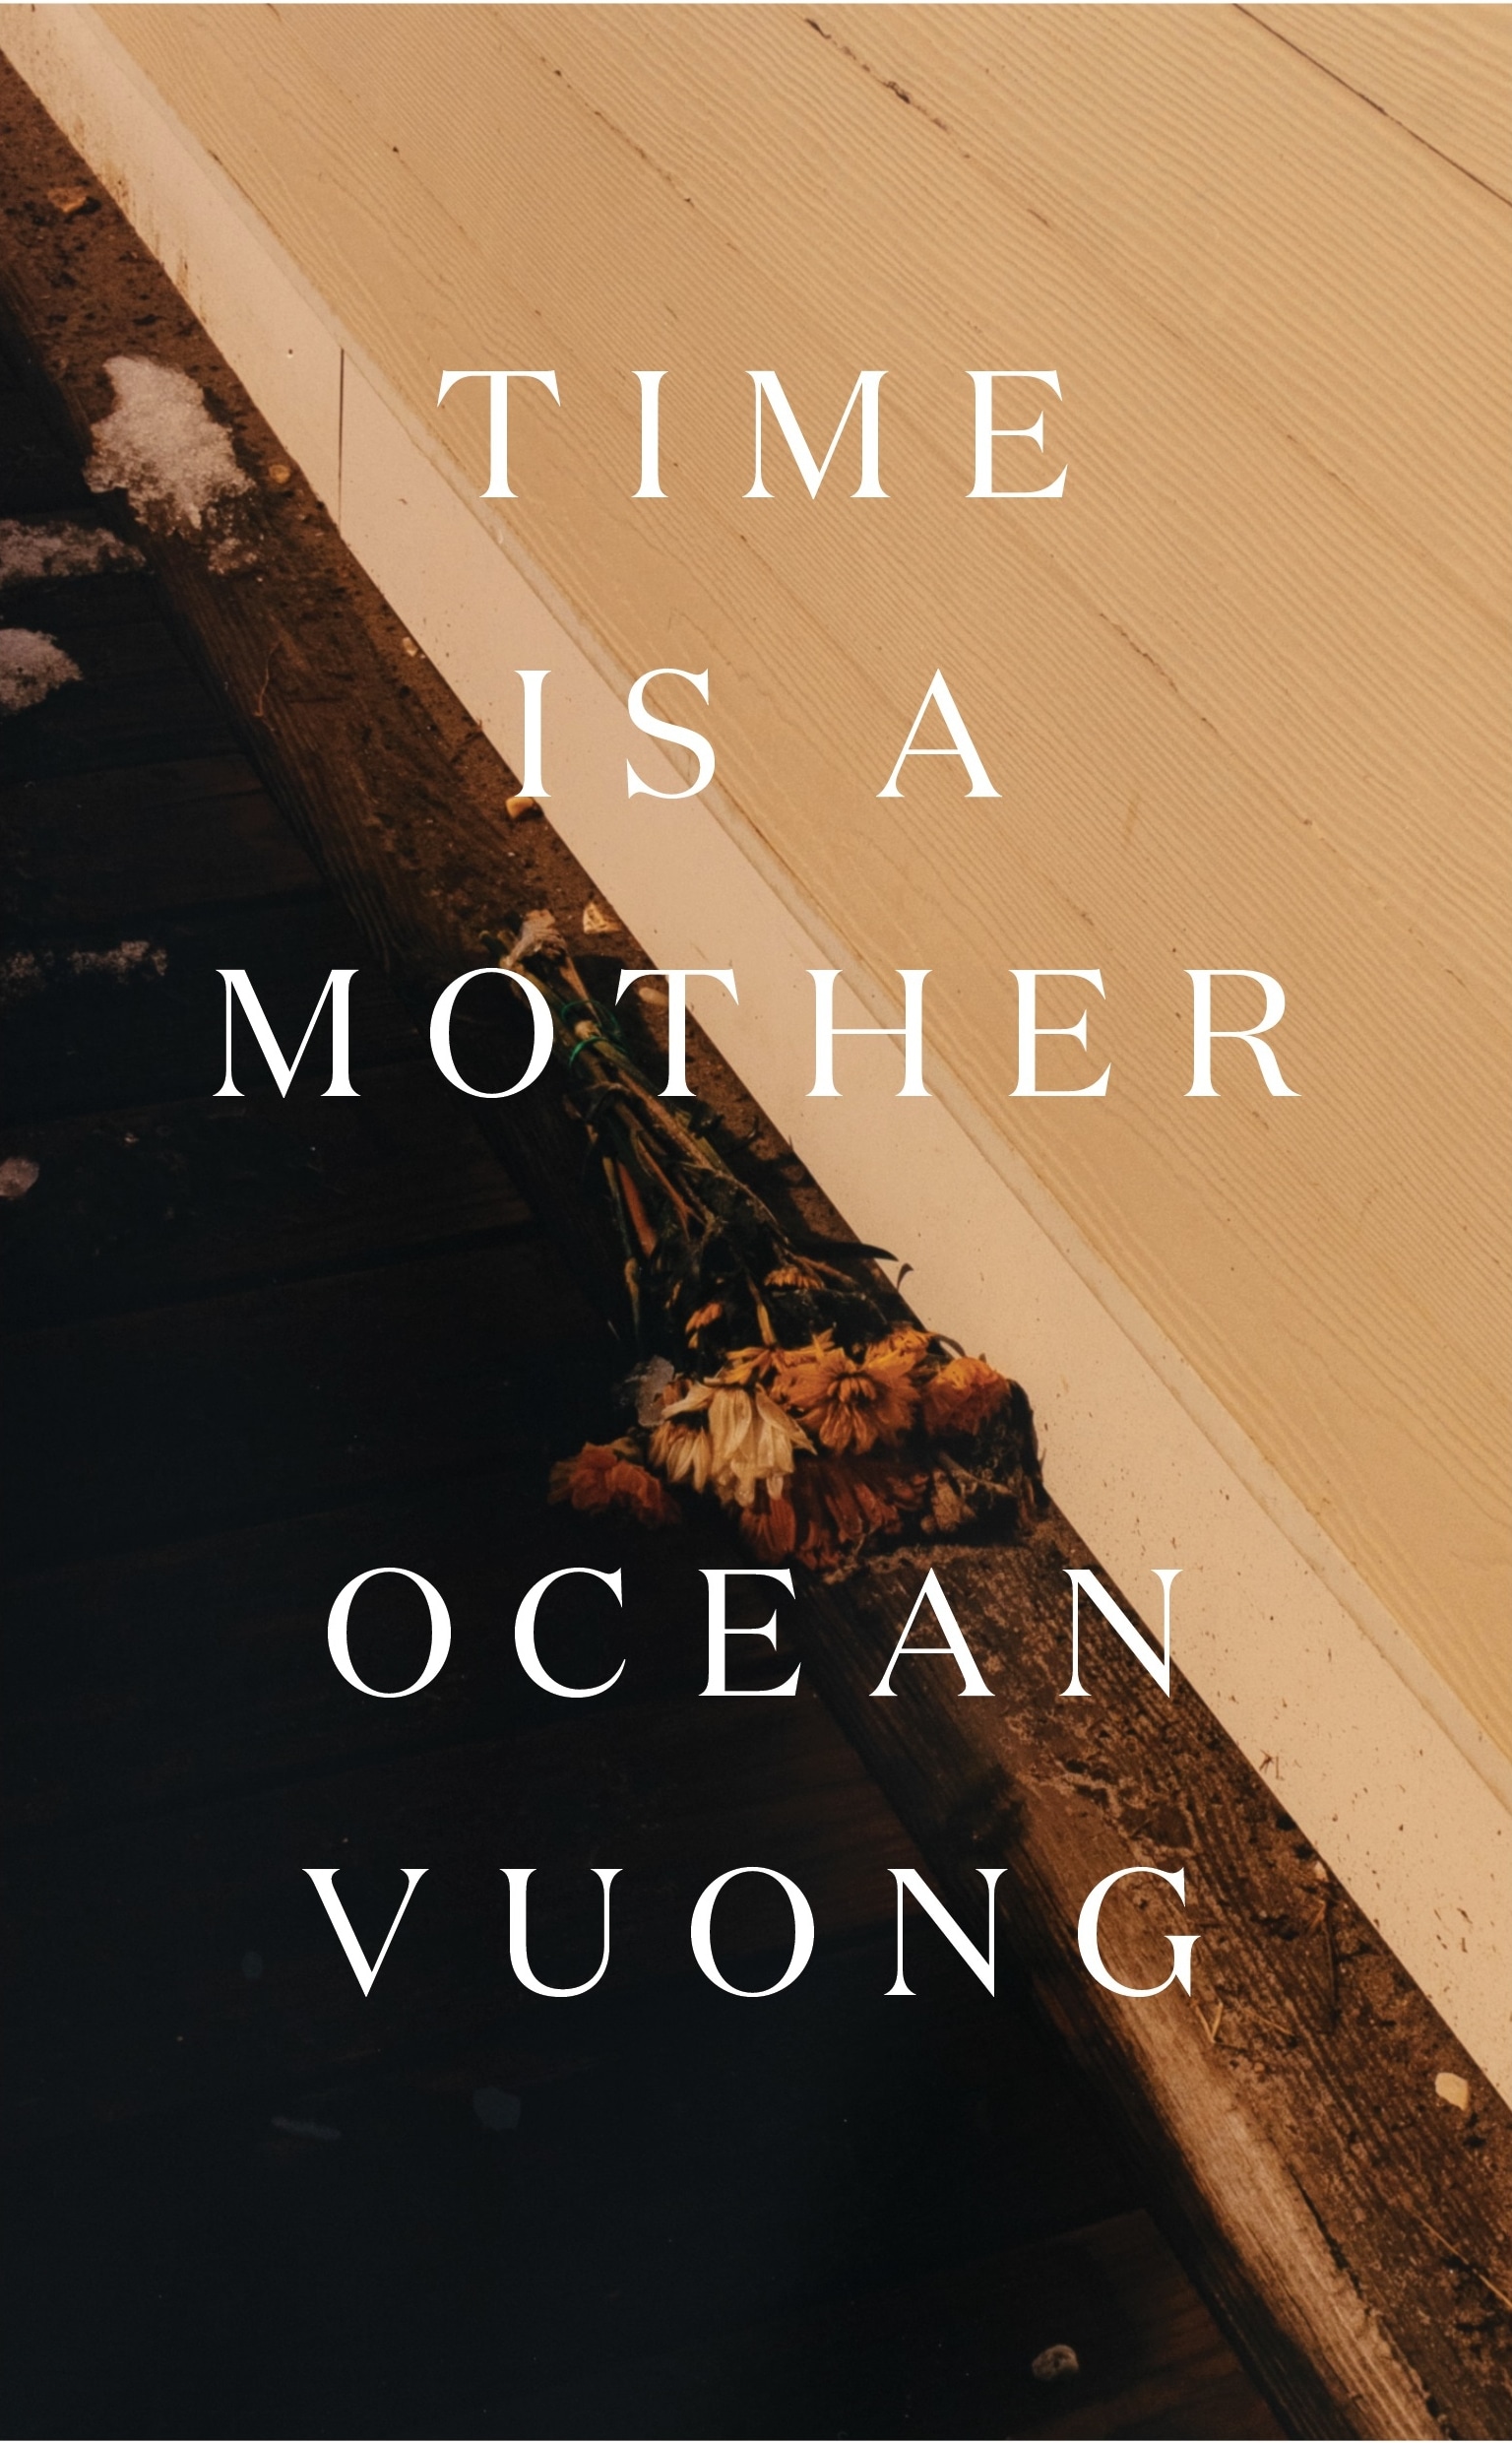 Book “Time is a Mother” by Ocean Vuong — April 7, 2022